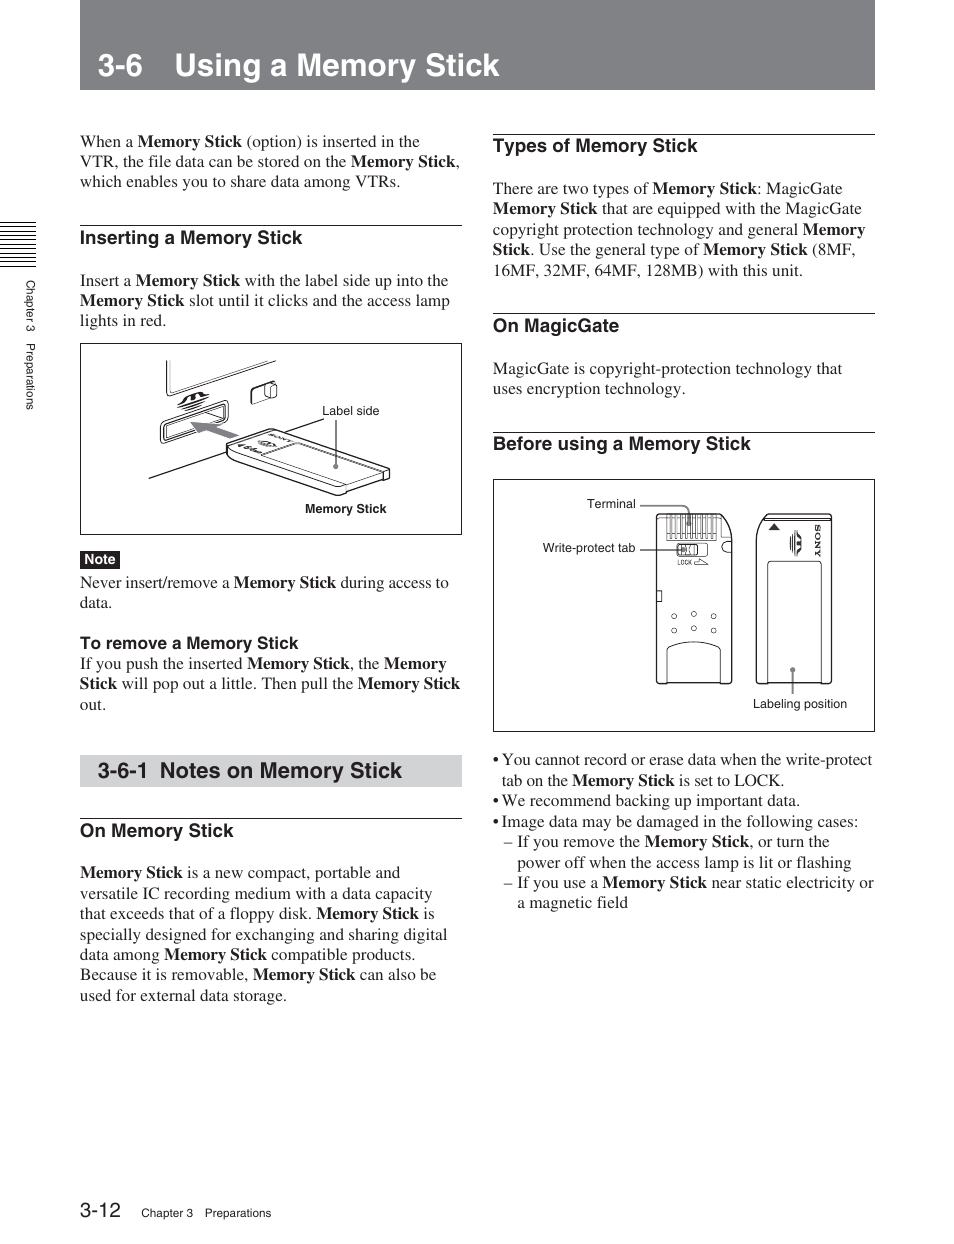 6 using a memory stick, 6-1 notes on memory stick | Sony DVW-2000 User Manual | Page 41 / 155